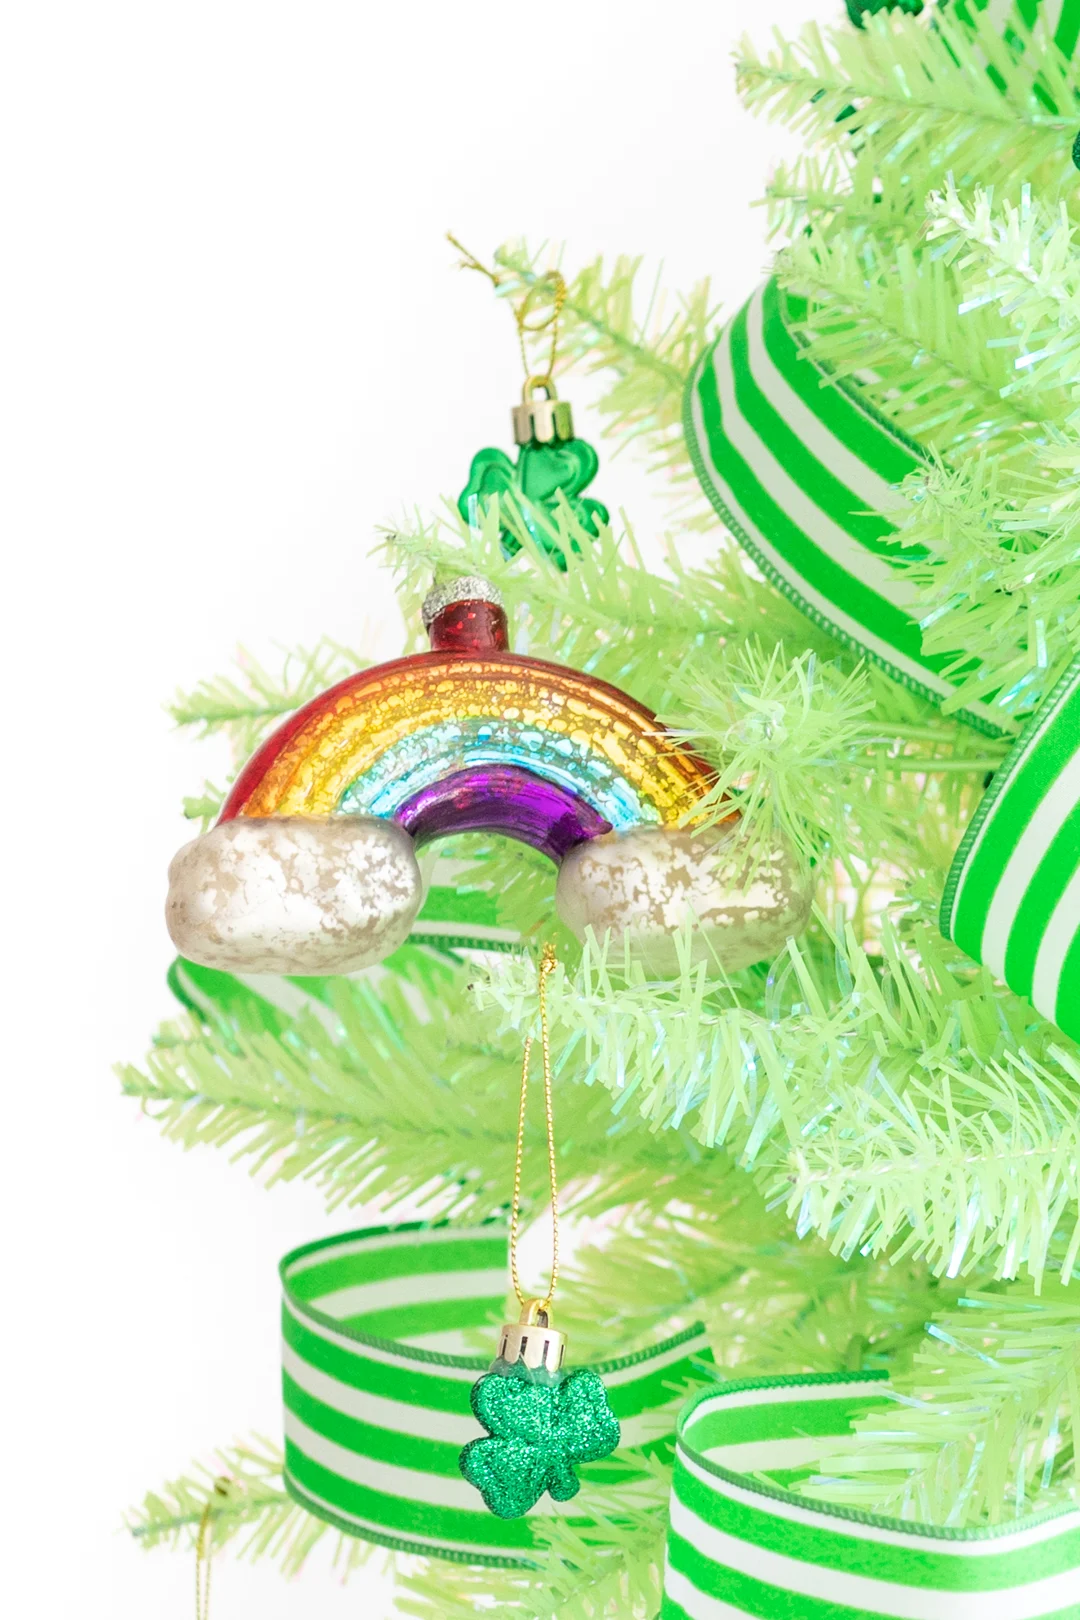 st. patrick's day ornaments. Glass rainbow ornament and green and white striped ribbon used to decorate for St. Patrick's Day.